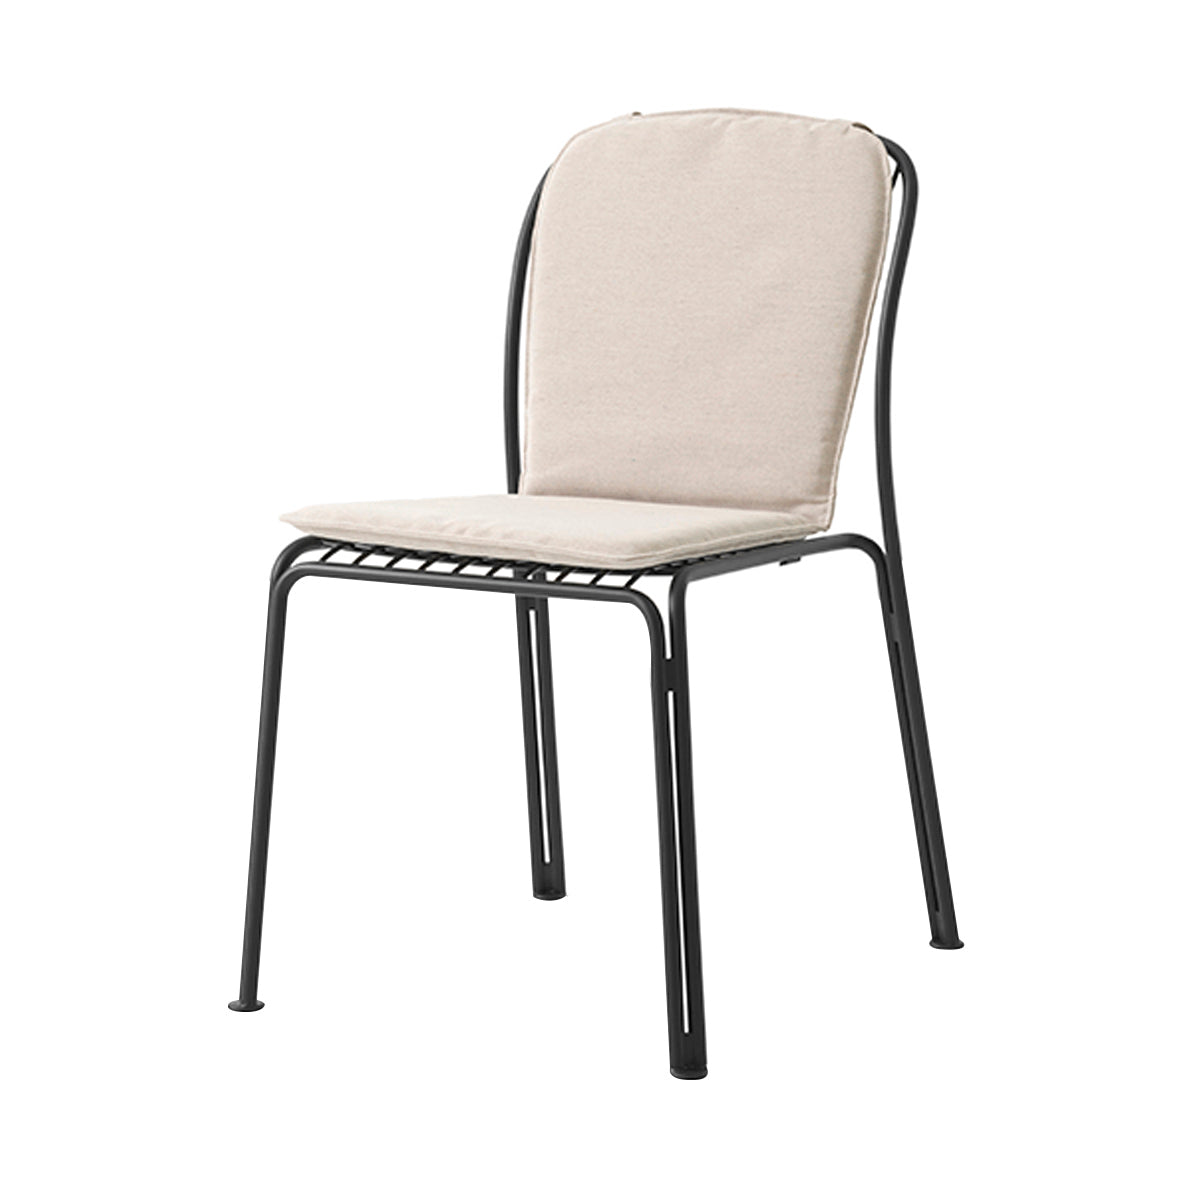 Thorvald SC94 Side Chair: Outdoor + Warm Black + With Heritage Papyrus Cushion